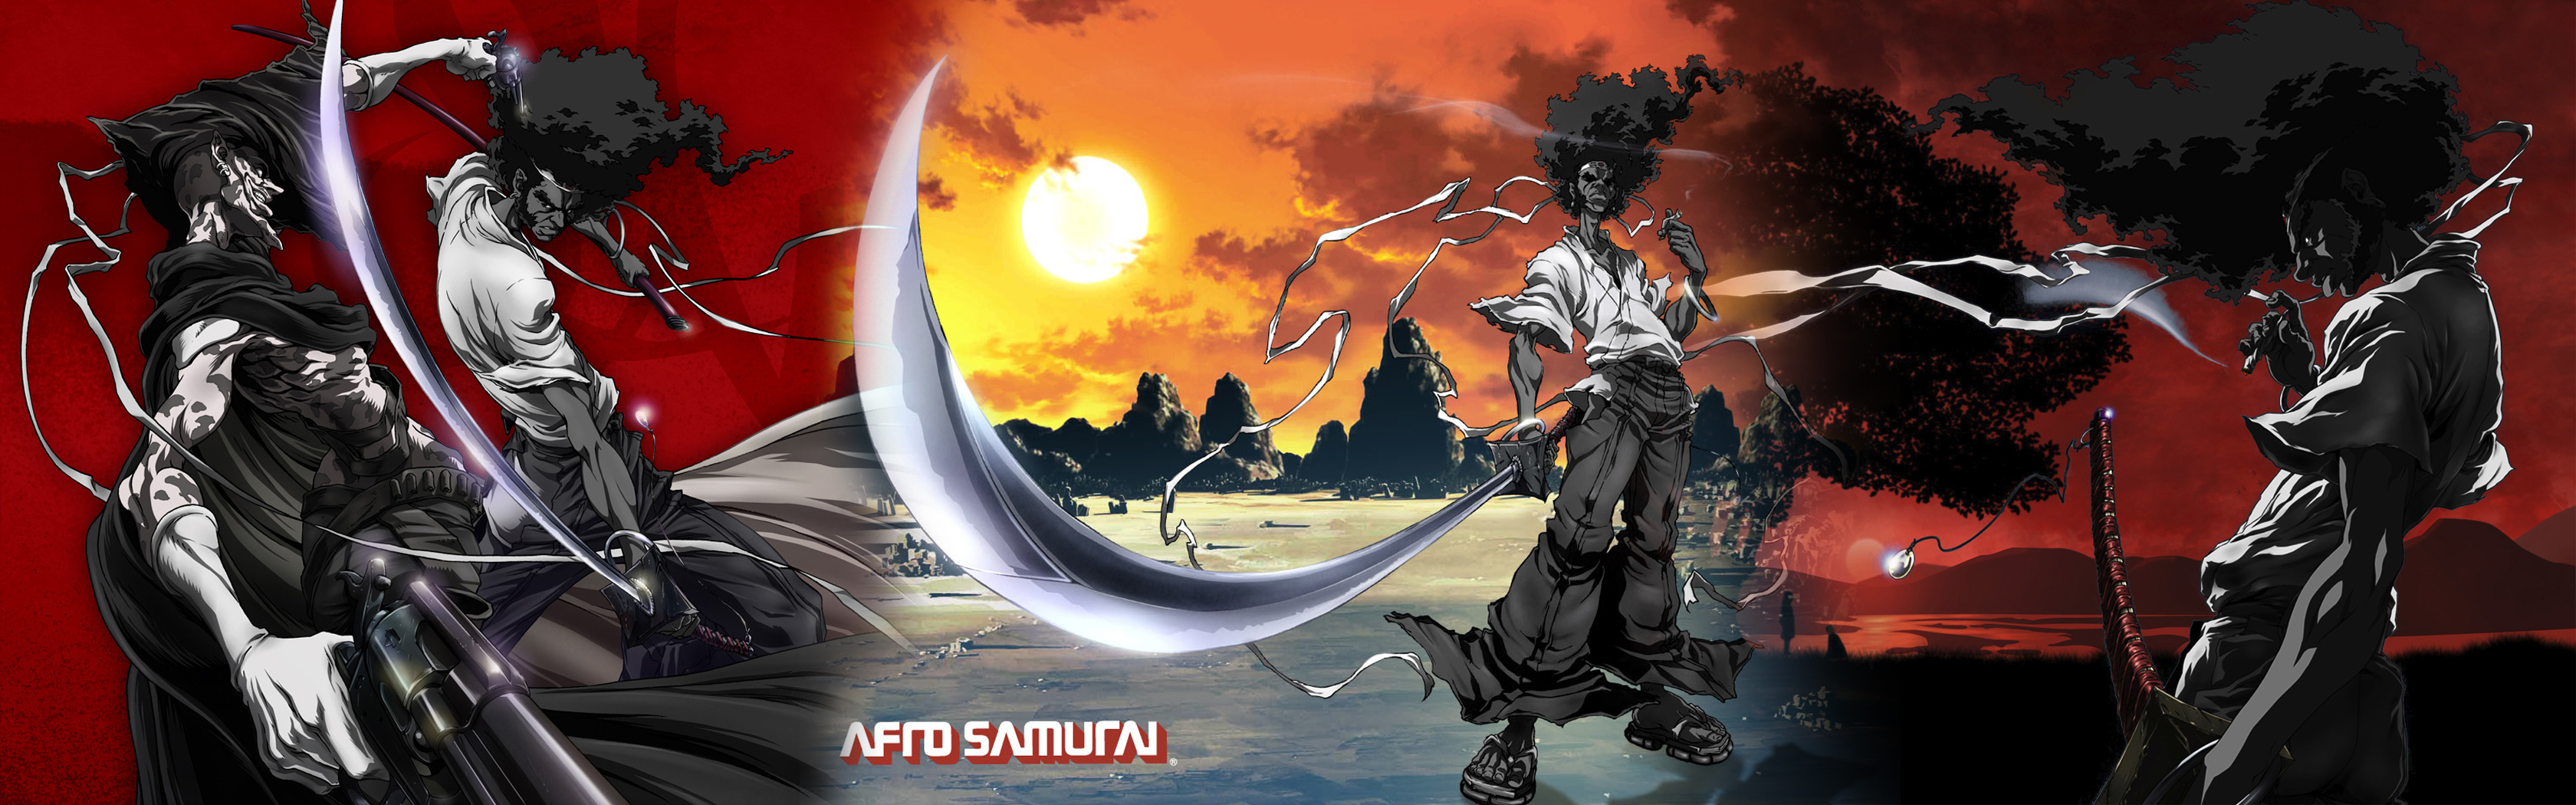 Dual Monitor Wallpaper Hd Anime For Gadget And Pc Wallpaper, - Dual Monitor Wallpaper Afro Samurai , HD Wallpaper & Backgrounds